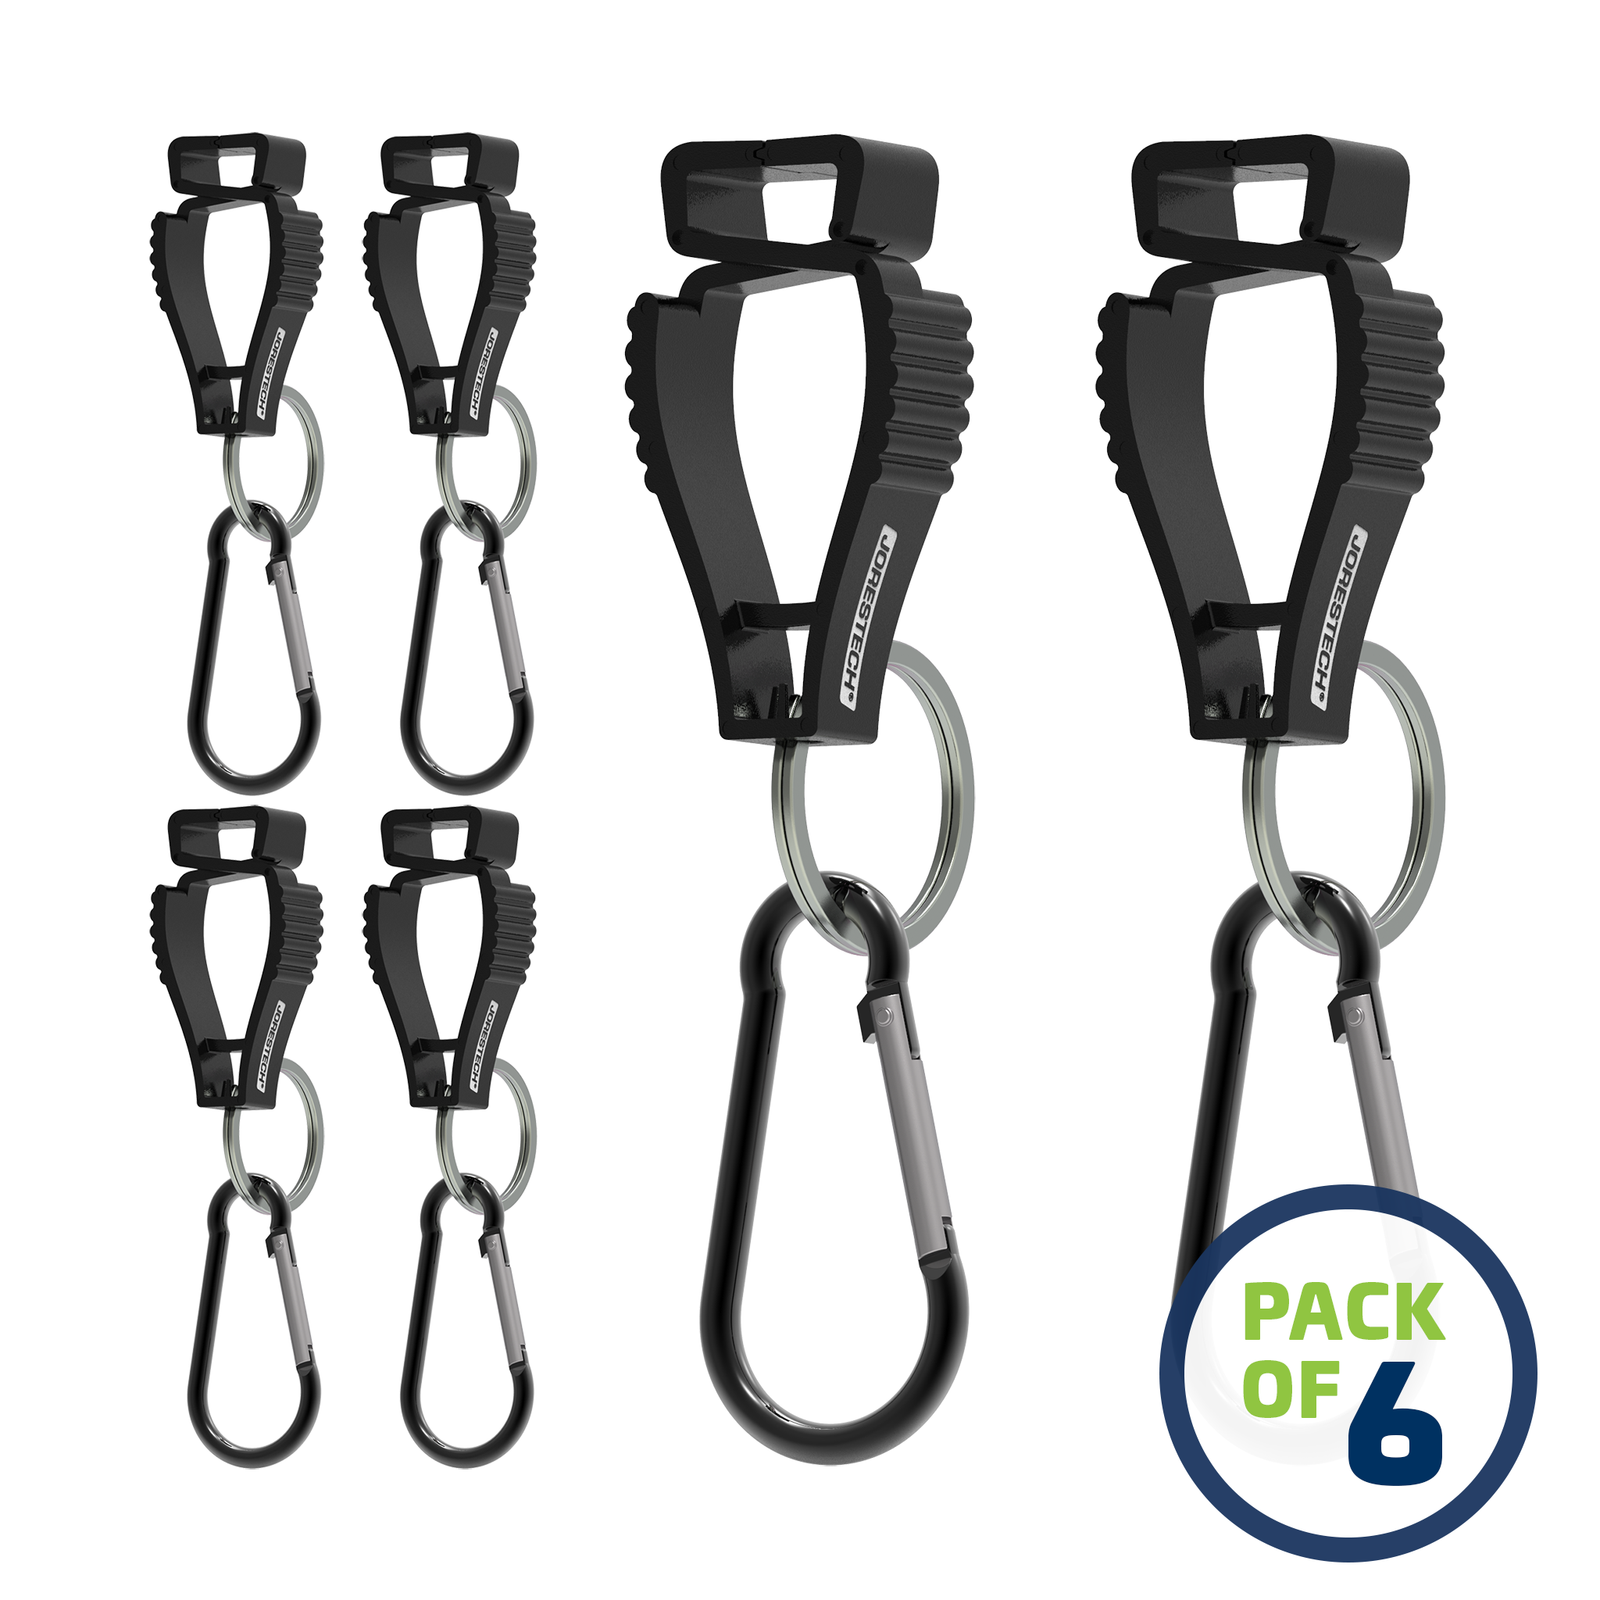 Pack of 6 Black JORESTECH glove clip safety holders with carabiner 